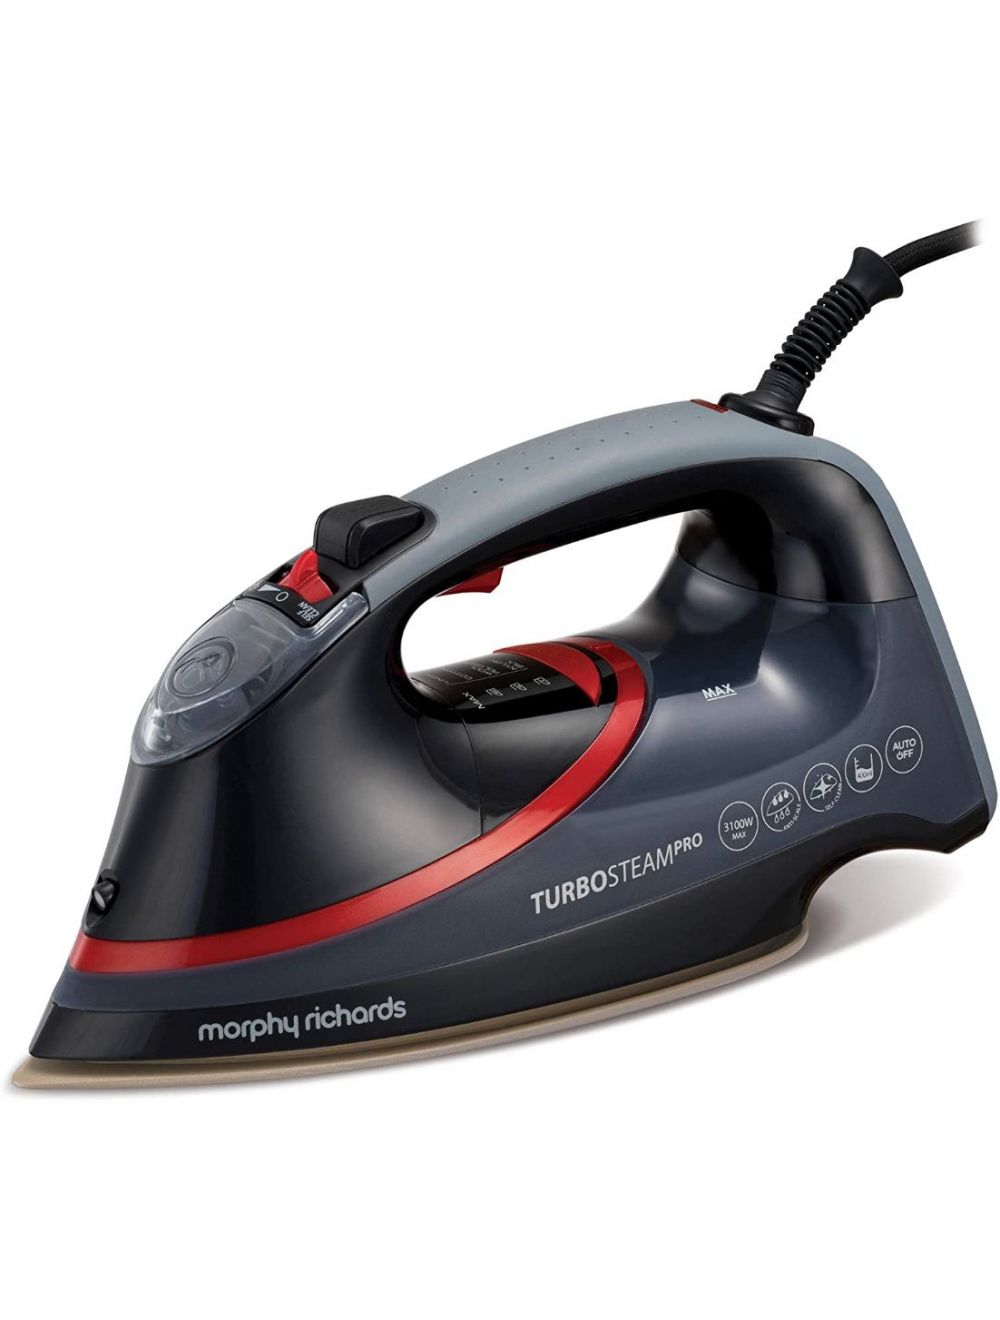 Morphy Richards Turbosteam Pro Ionic Steam Iron-Black Red-303125